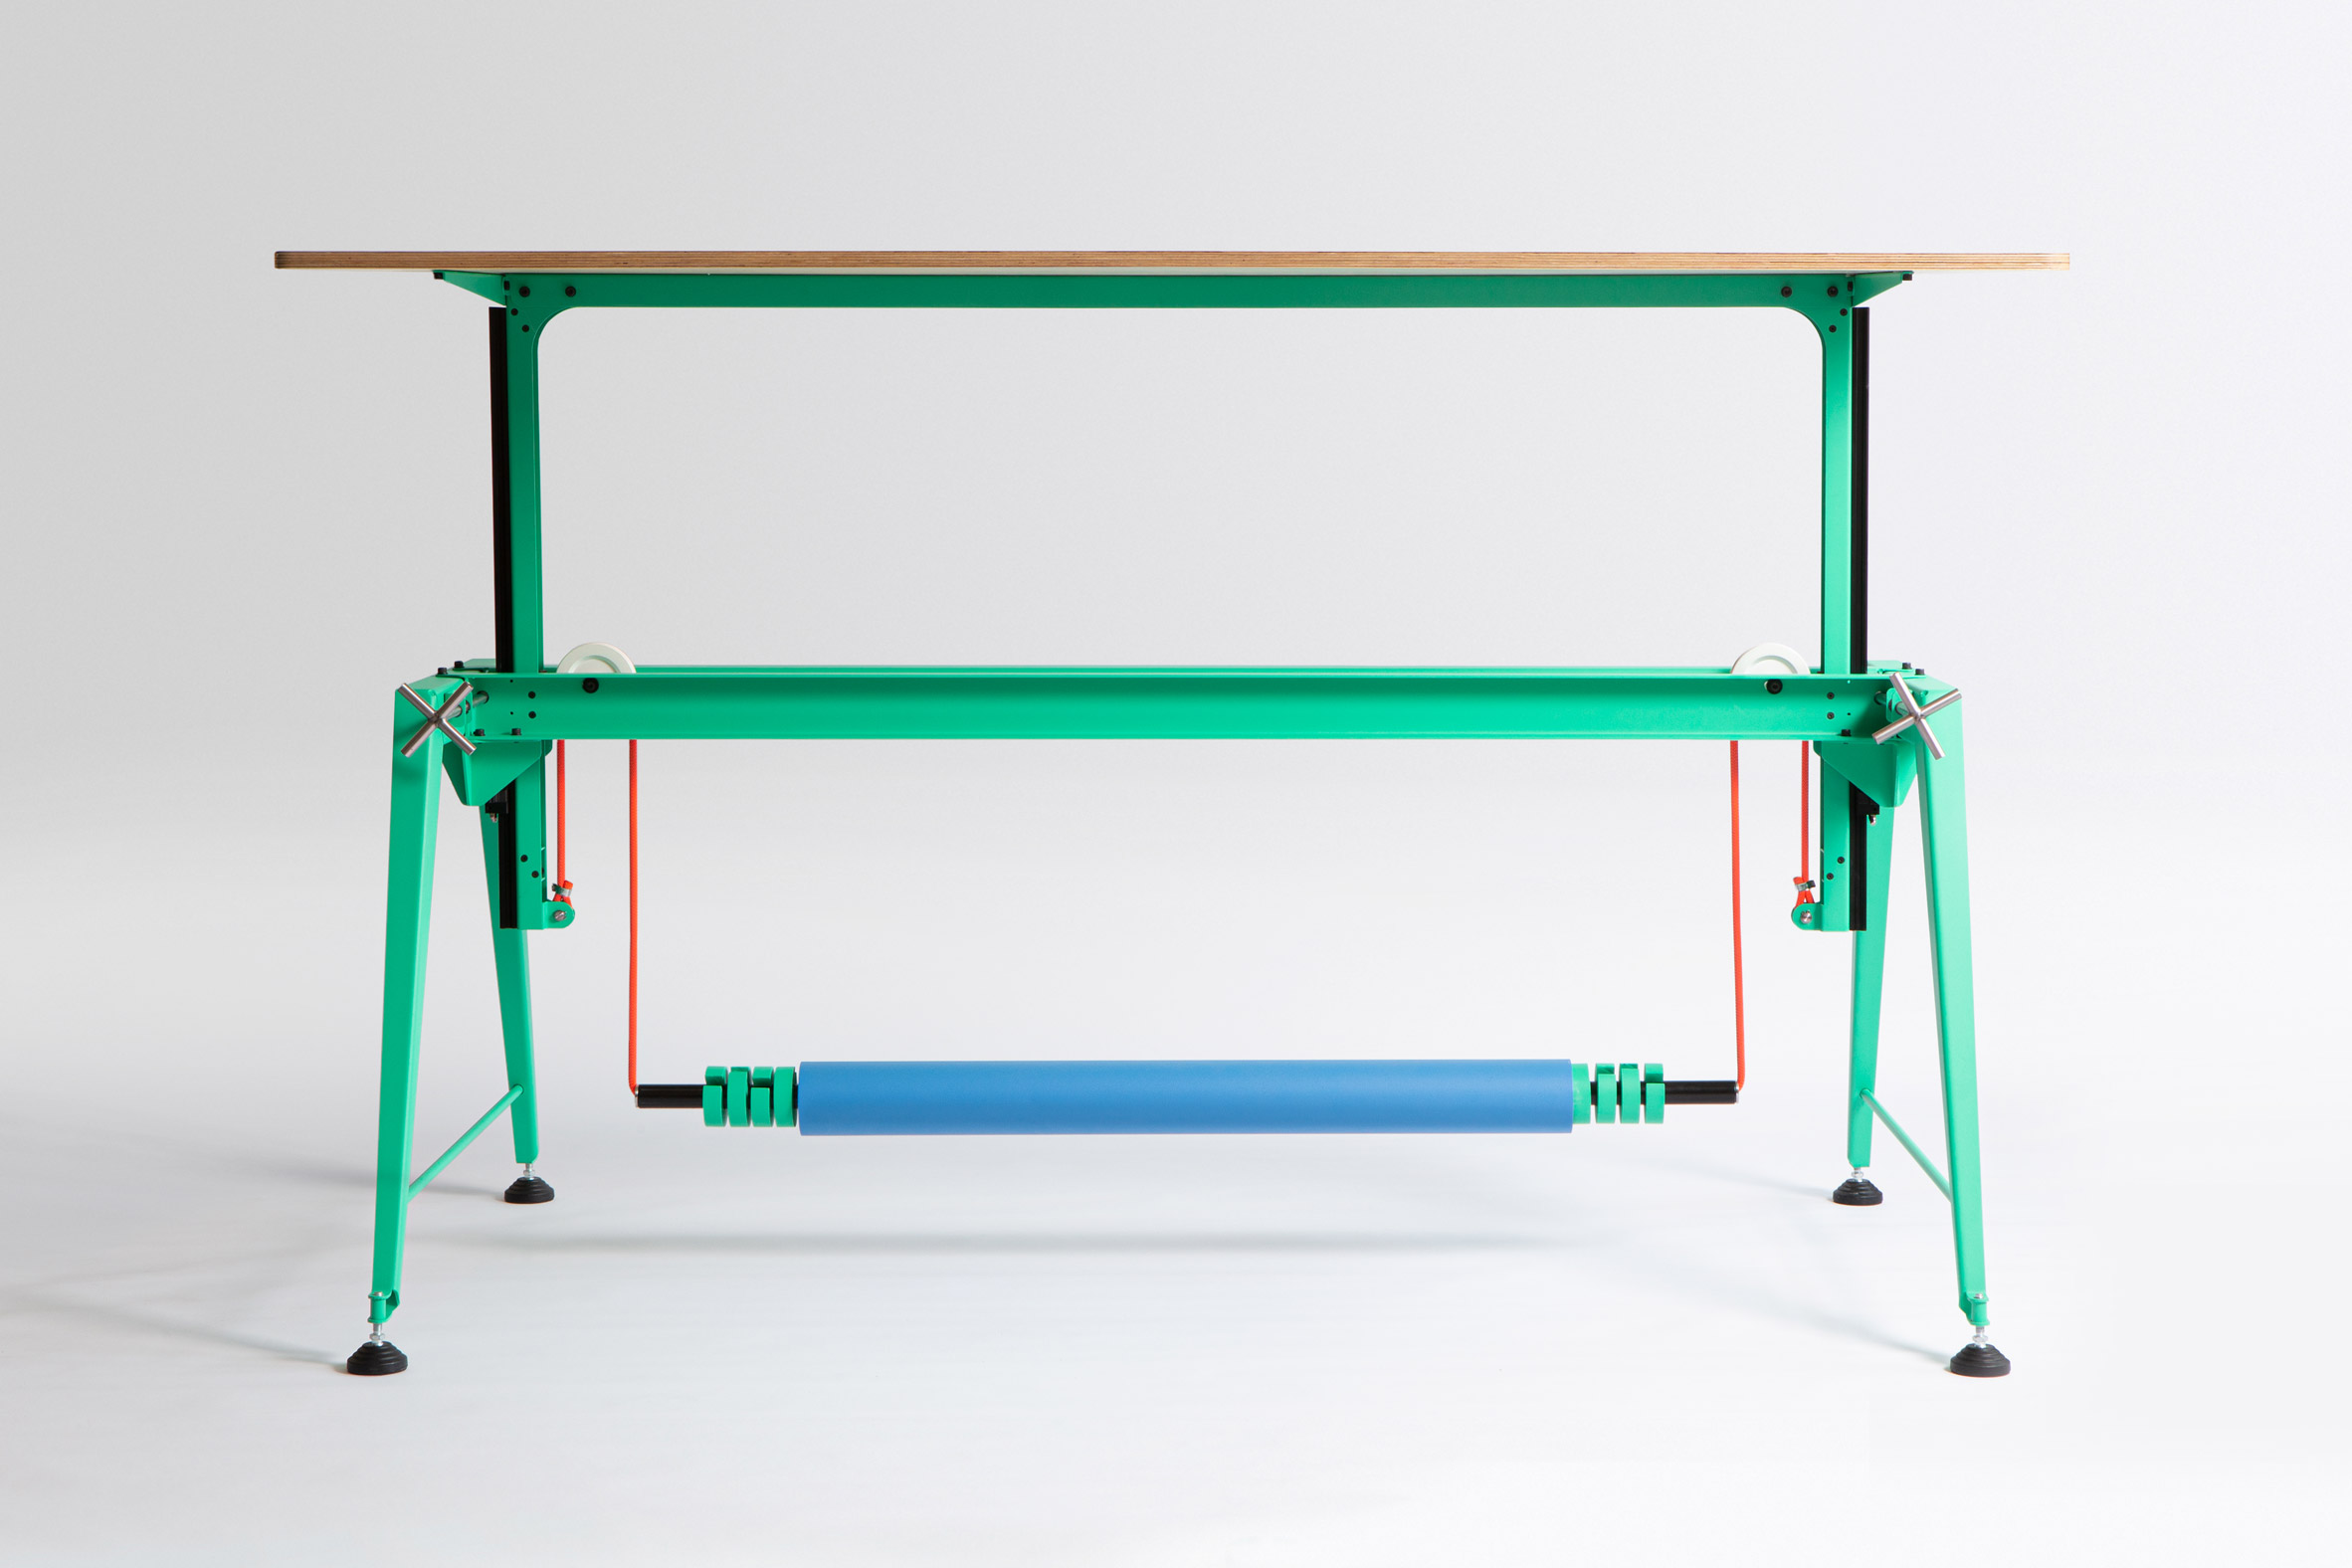 Photo of the Counterweight Table in green with a blue counterweight, red rope and wooden tabletop